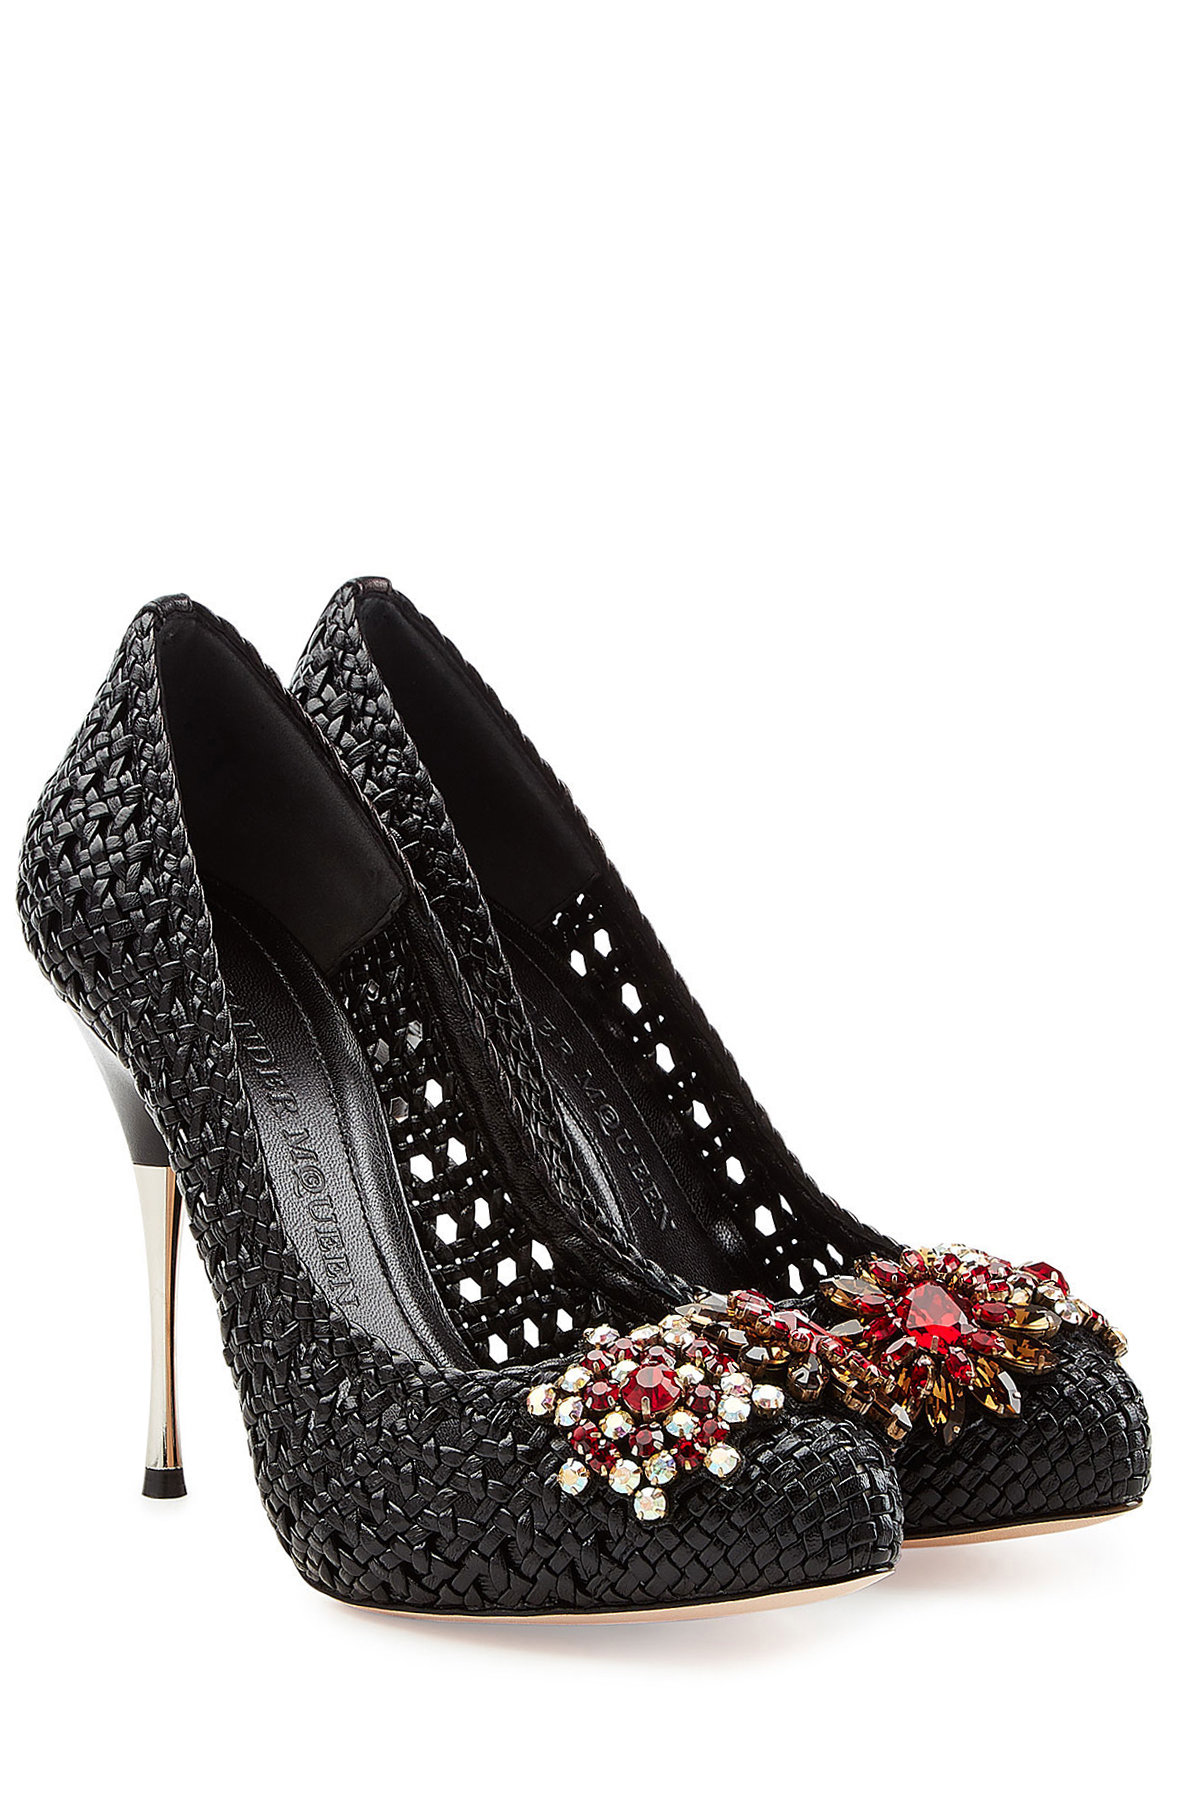 Alexander McQueen - Woven Leather Pumps with Crystal Embellishment